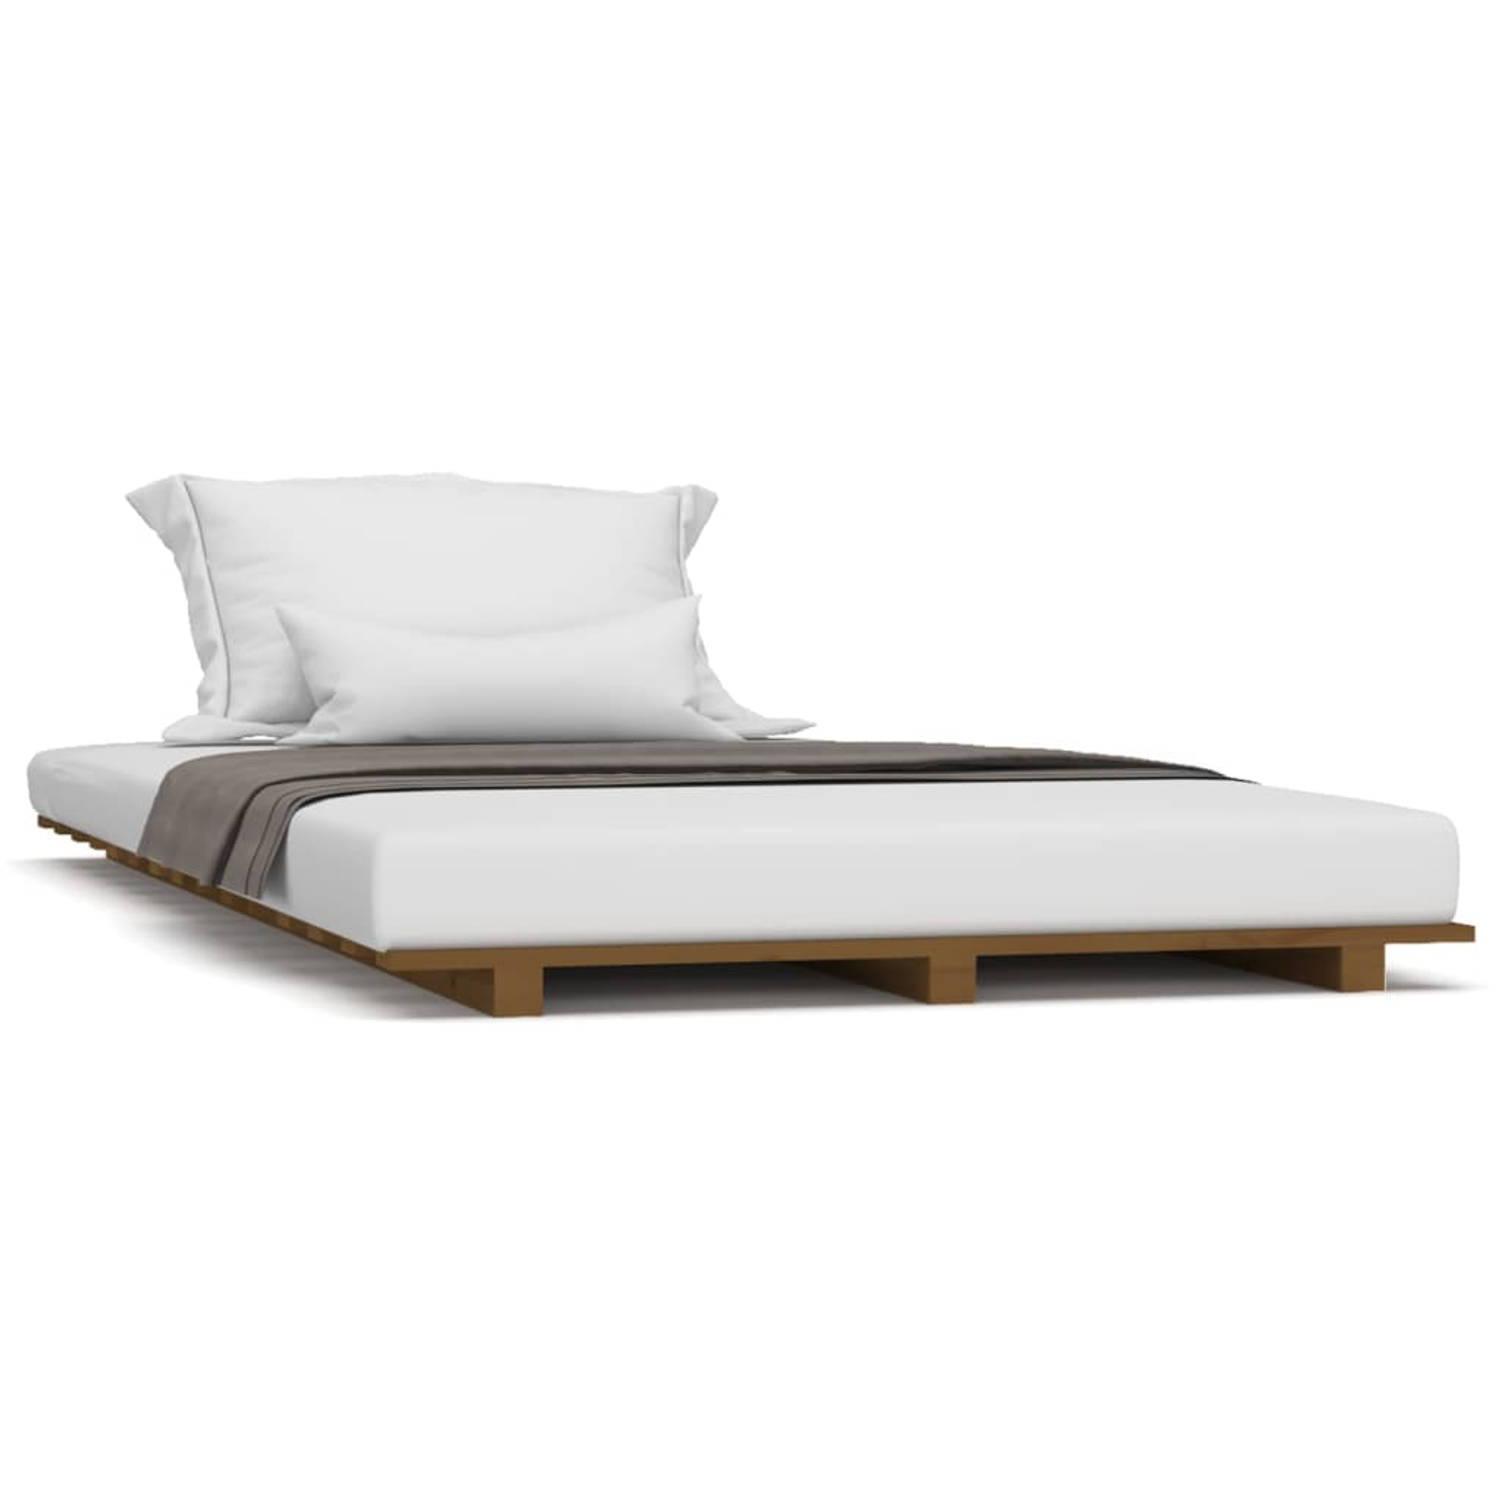 The Living Store Bedframe massief grenenhout honingbruin 100x200 cm - Bed